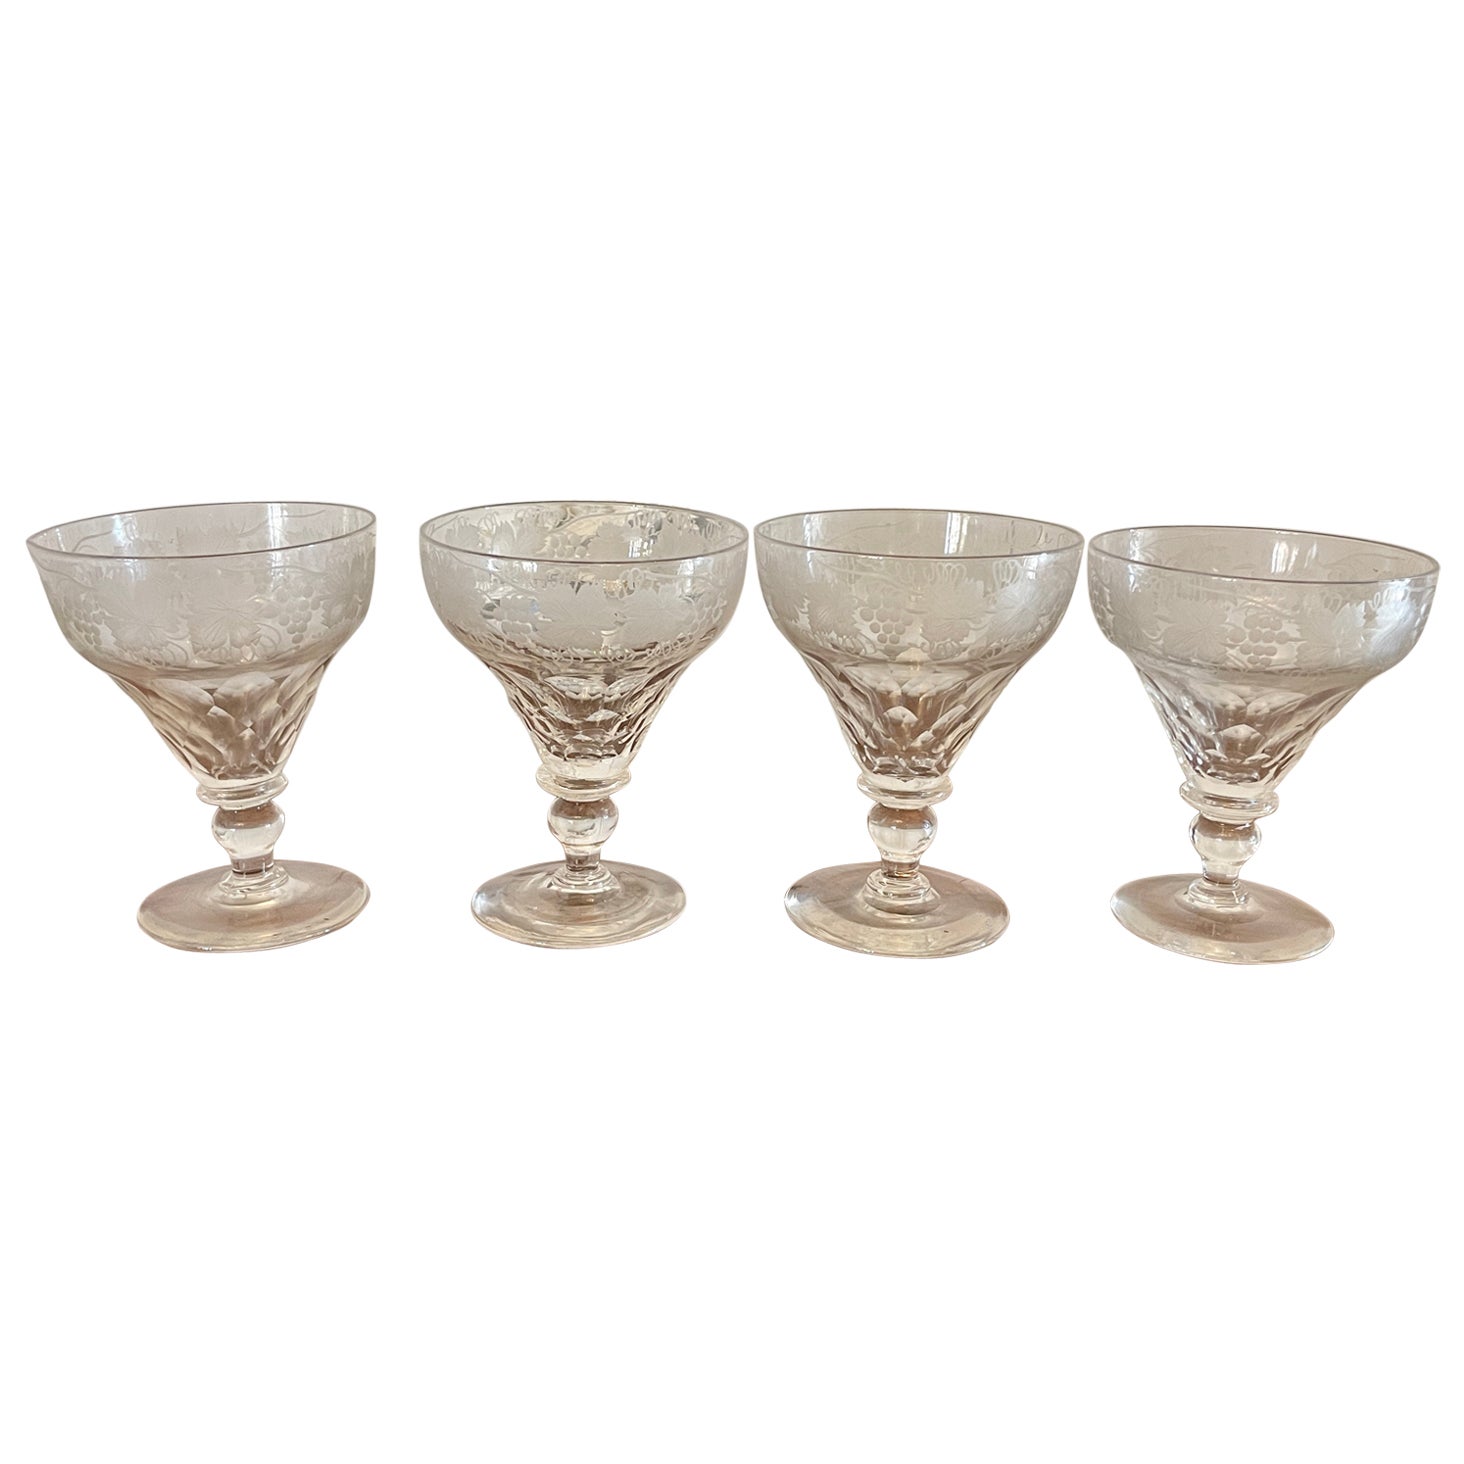 Unusual Large Set of 4 Antique Victorian Quality Engraved Glasses 